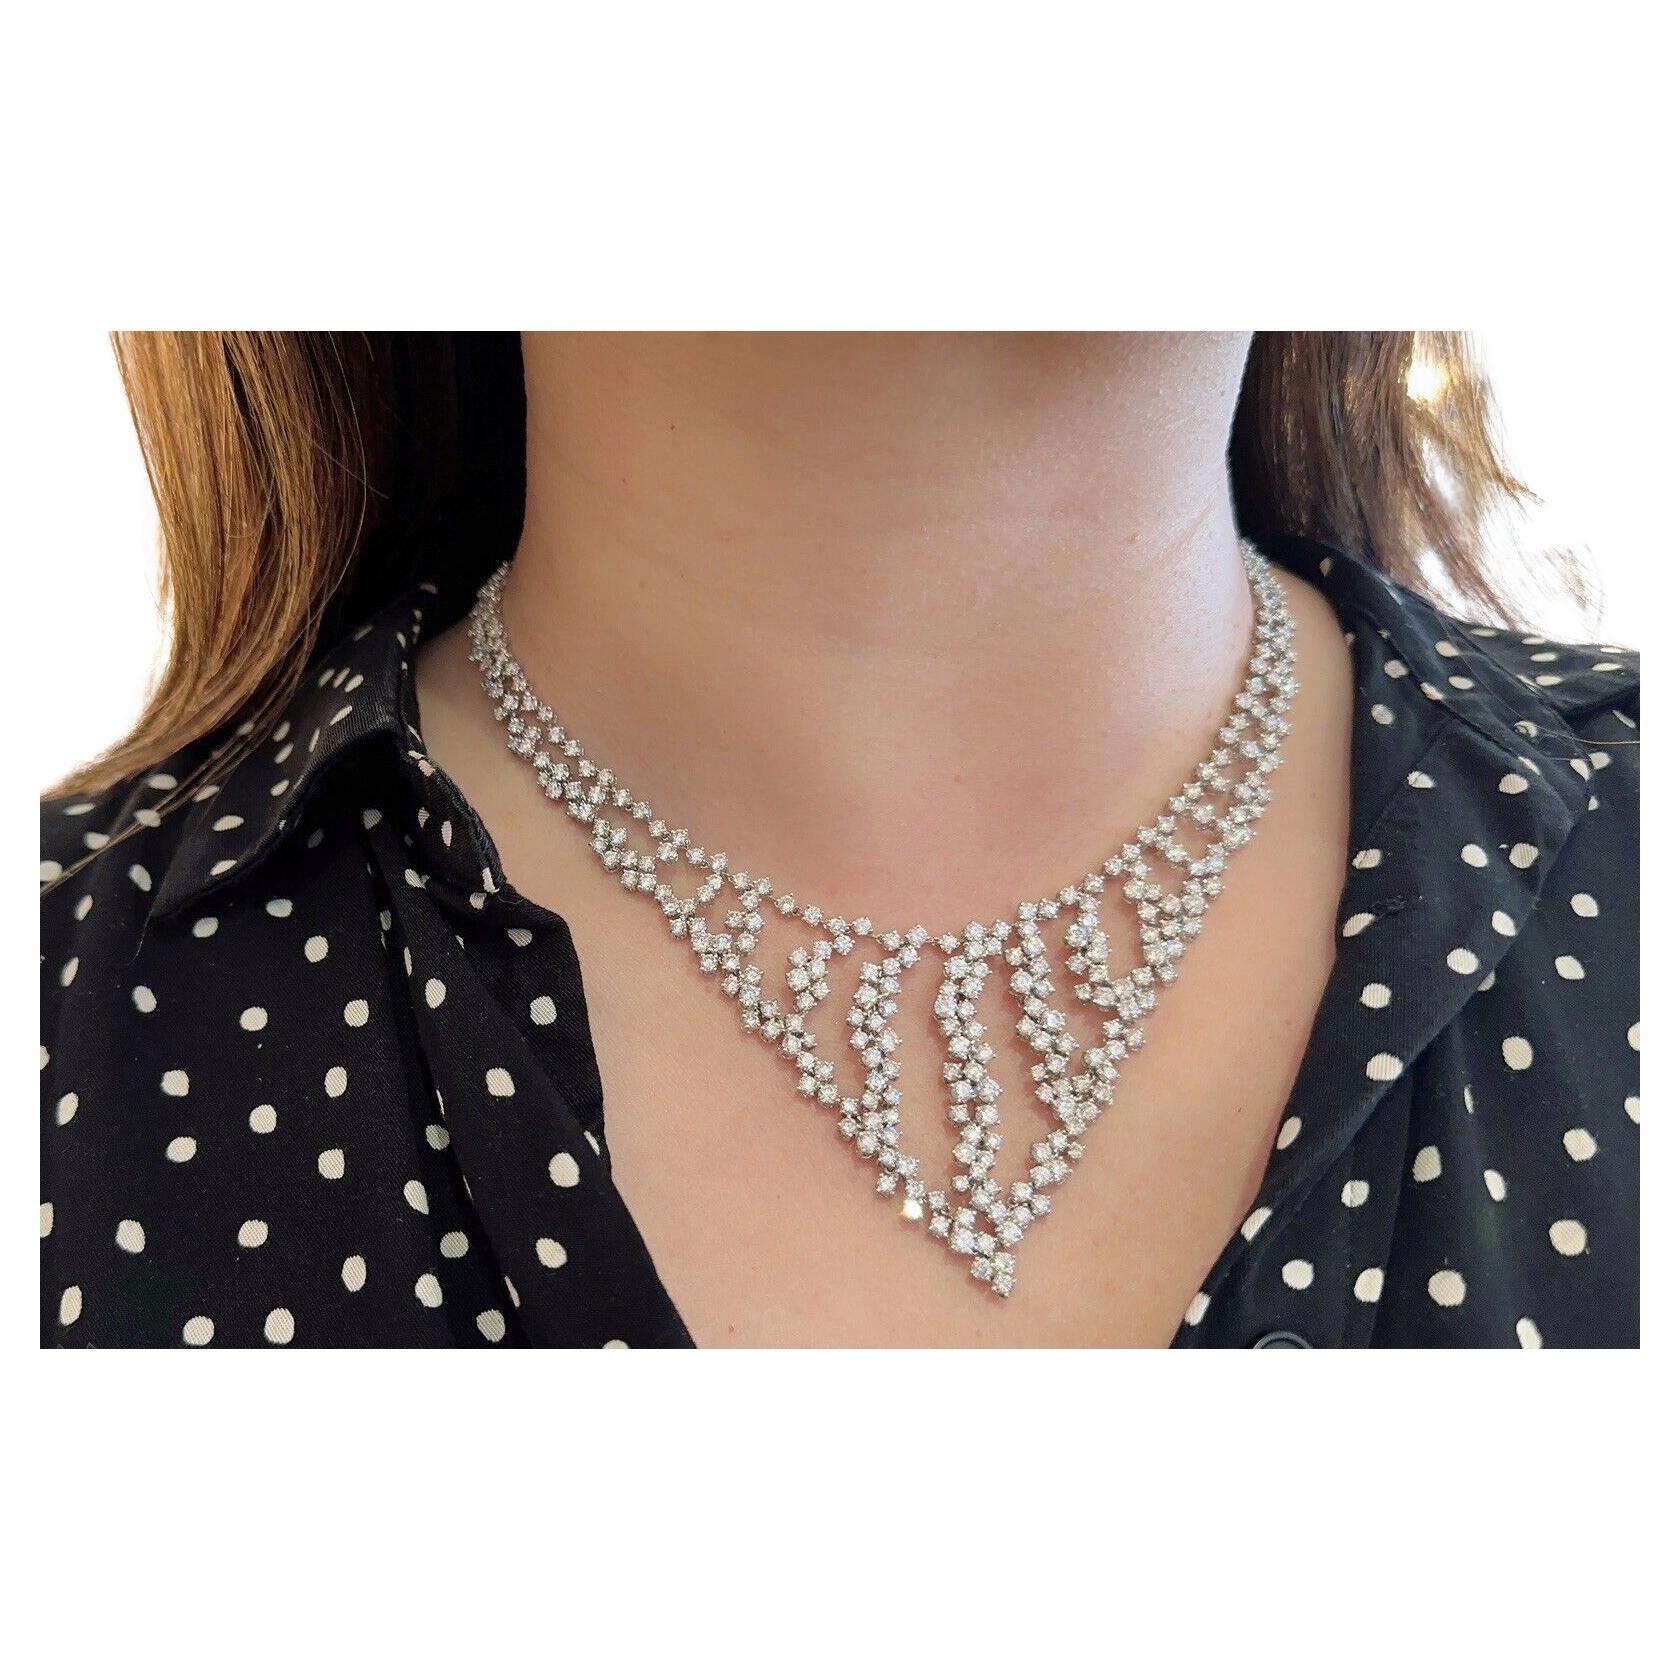 Round Brilliant Diamond Bib Necklace 25.00 cttw in 18k White Gold 

This is a spectacular statement necklace in 18k white gold featuring a total of 25.00 carats of lively, white brilliant cut diamonds set in an open cascading design that elegantly